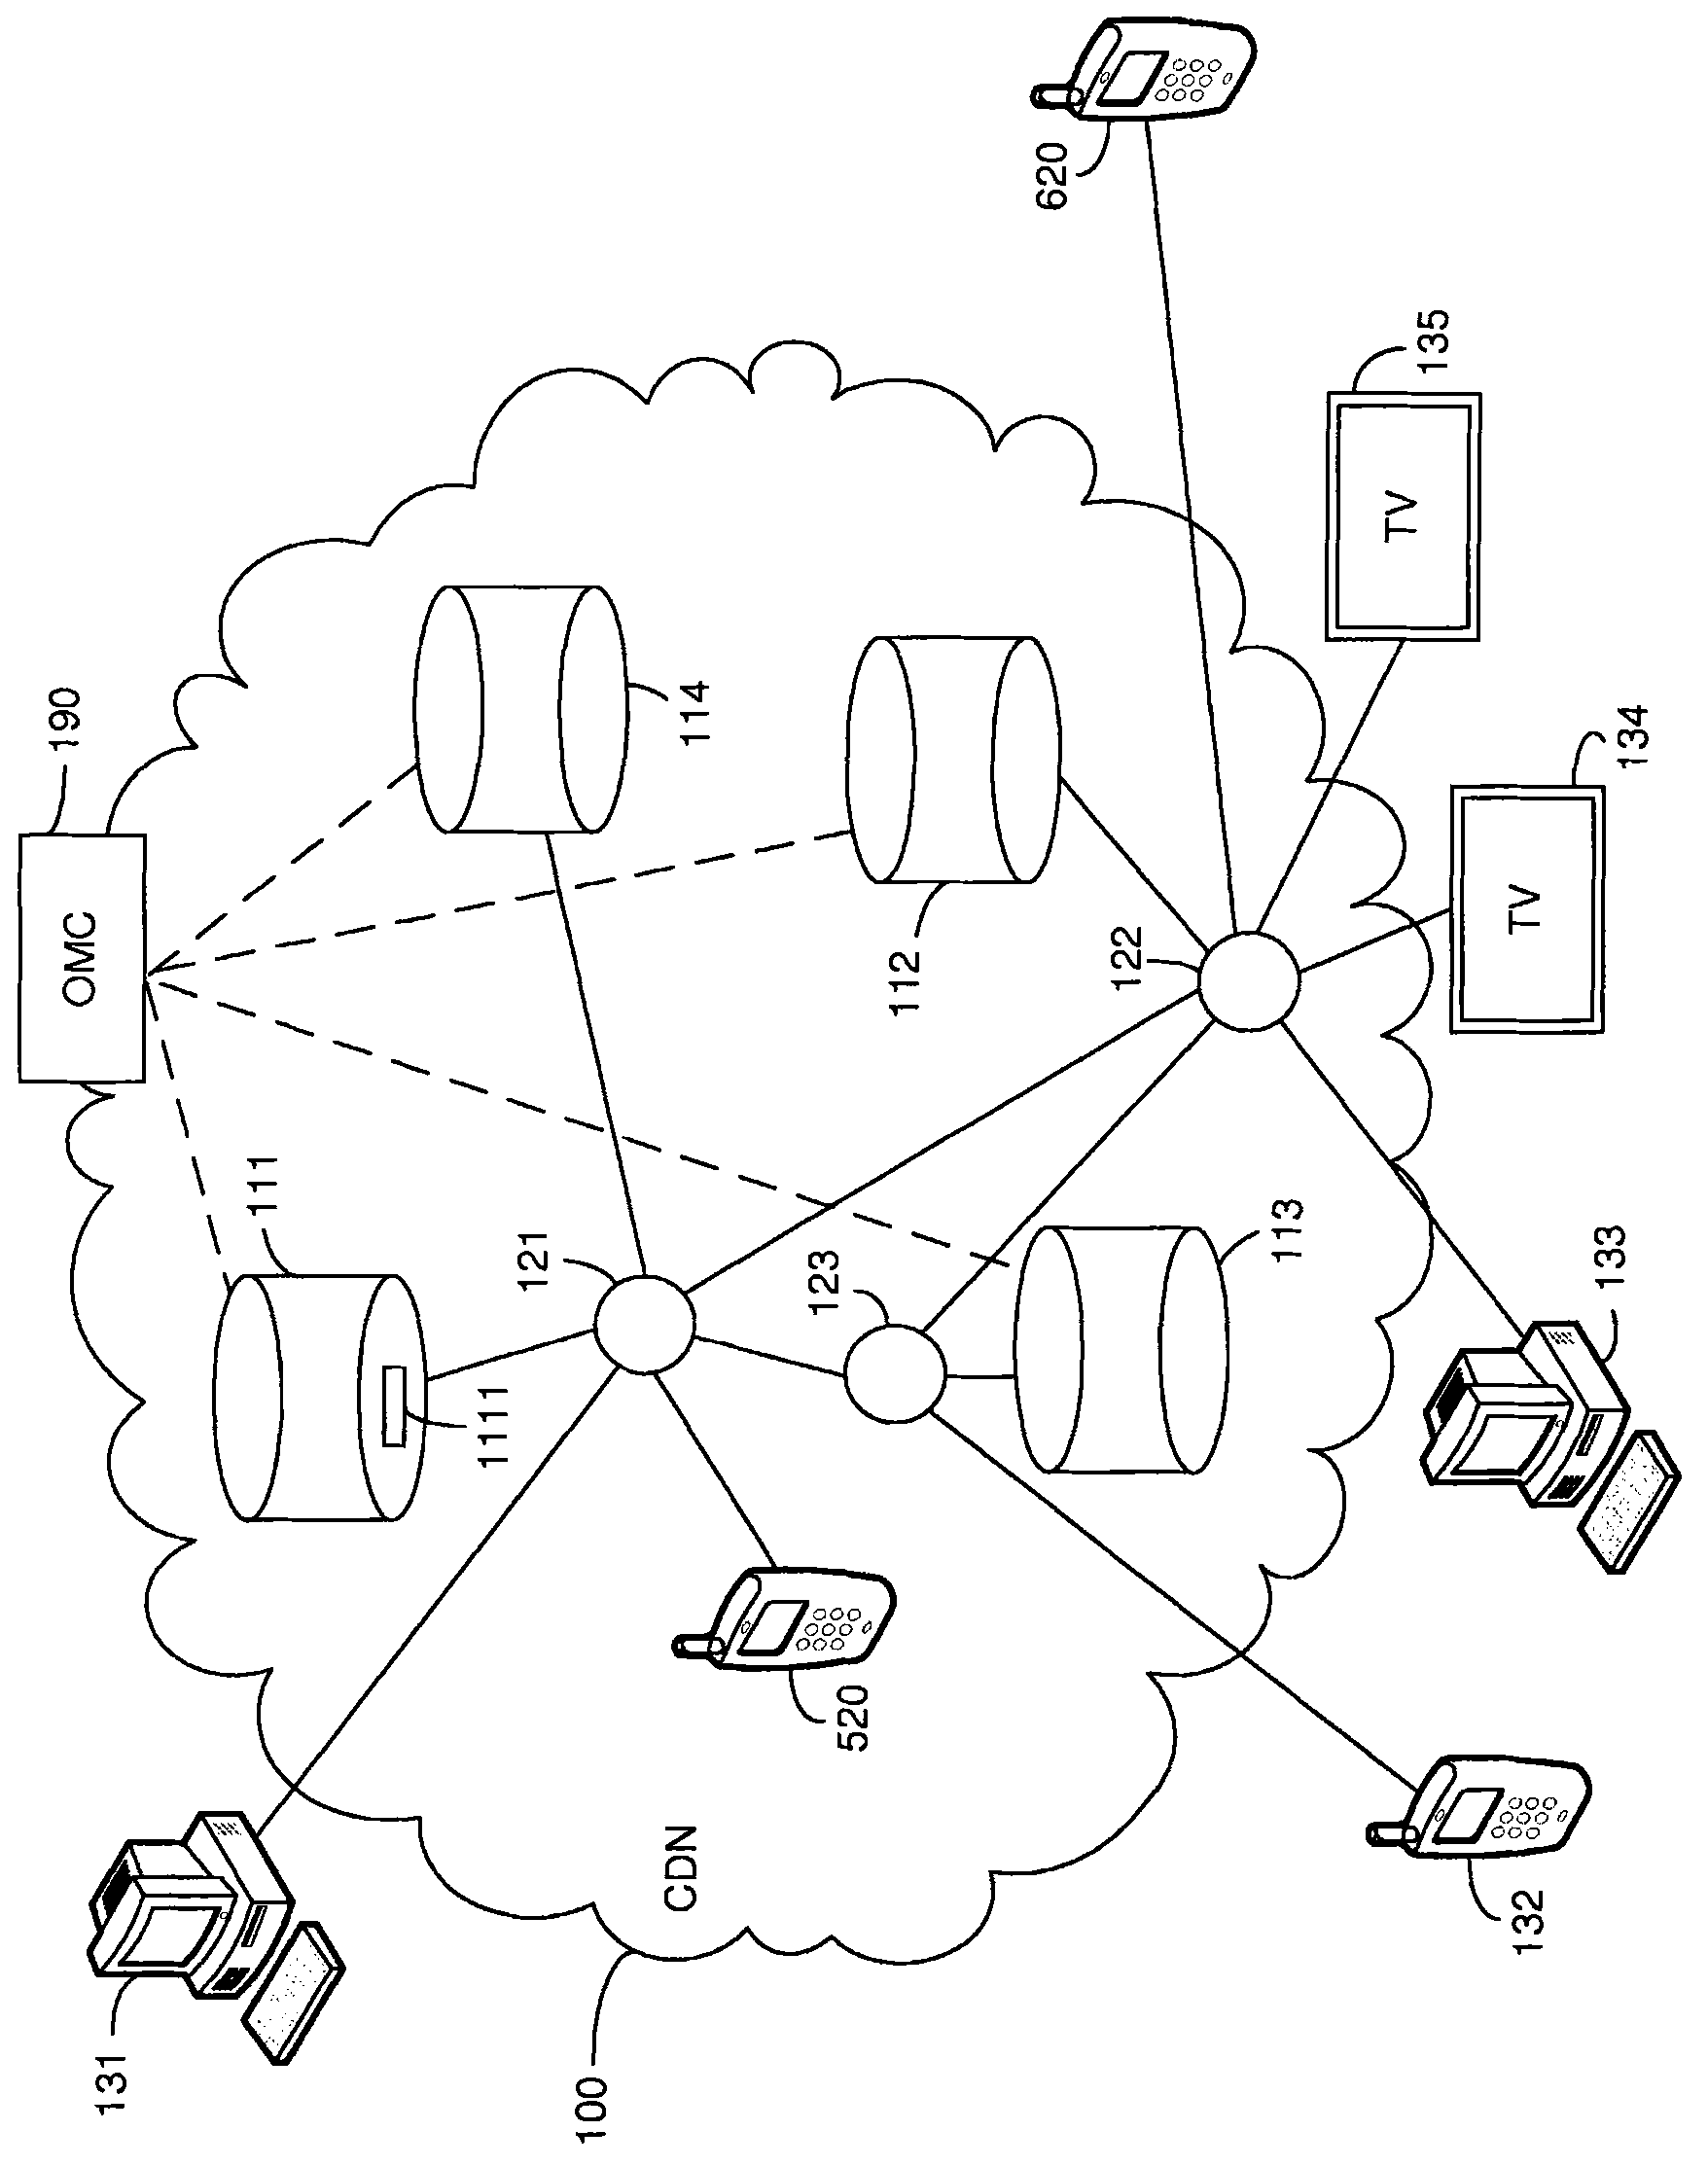 Method for content delivery involving a policy database